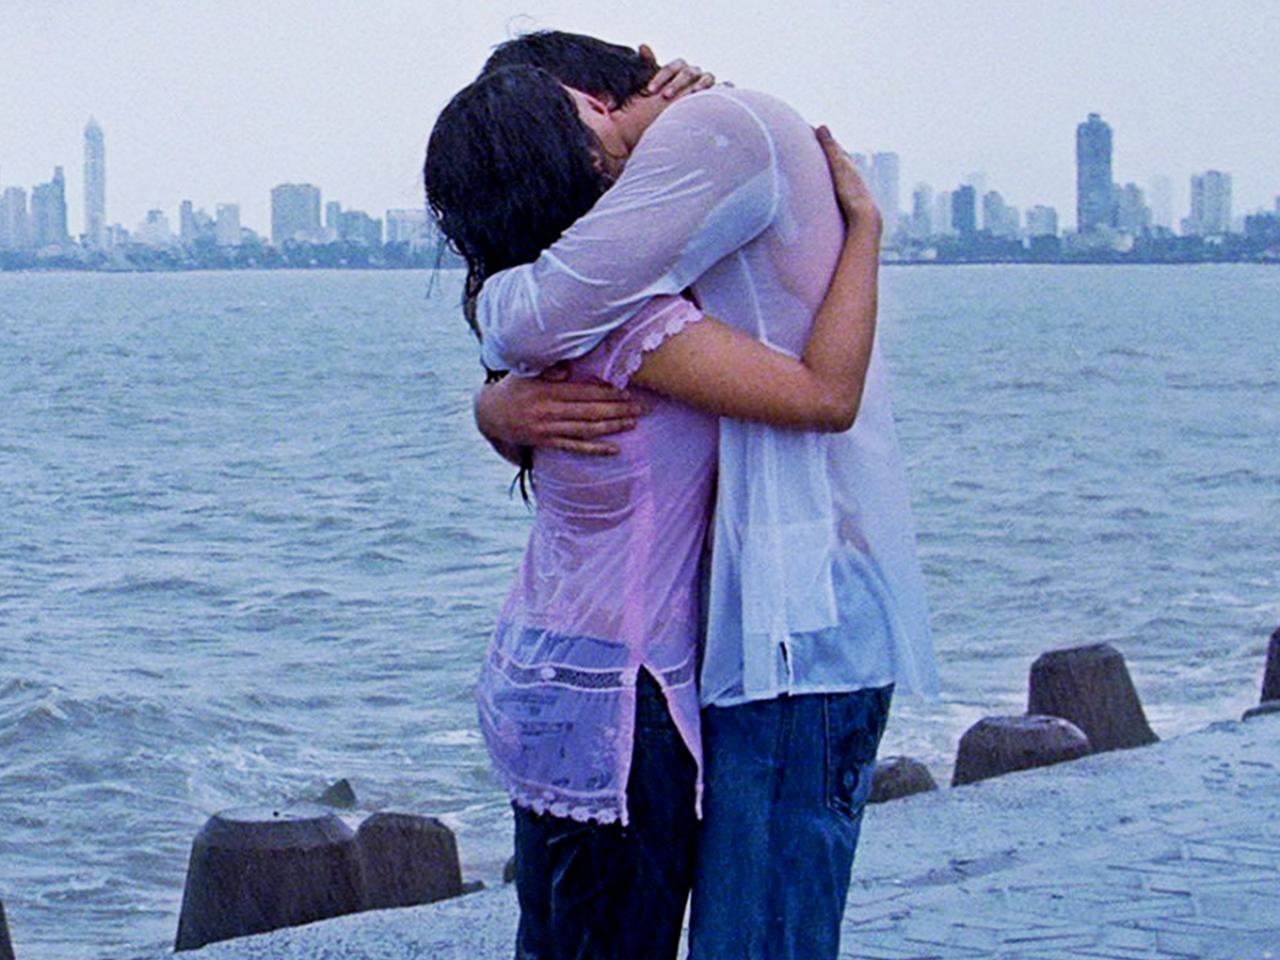 6. Wake Up Sid
During the first rain of the season, Sid and Aisha find themselves at Marine Drive, where they have a profound realization of their love for each other. Acknowledging that they are more than just friends, they embrace against a rain-drenched landscape. The scene is a testament of love and an ode to Mumbai’s monsoon